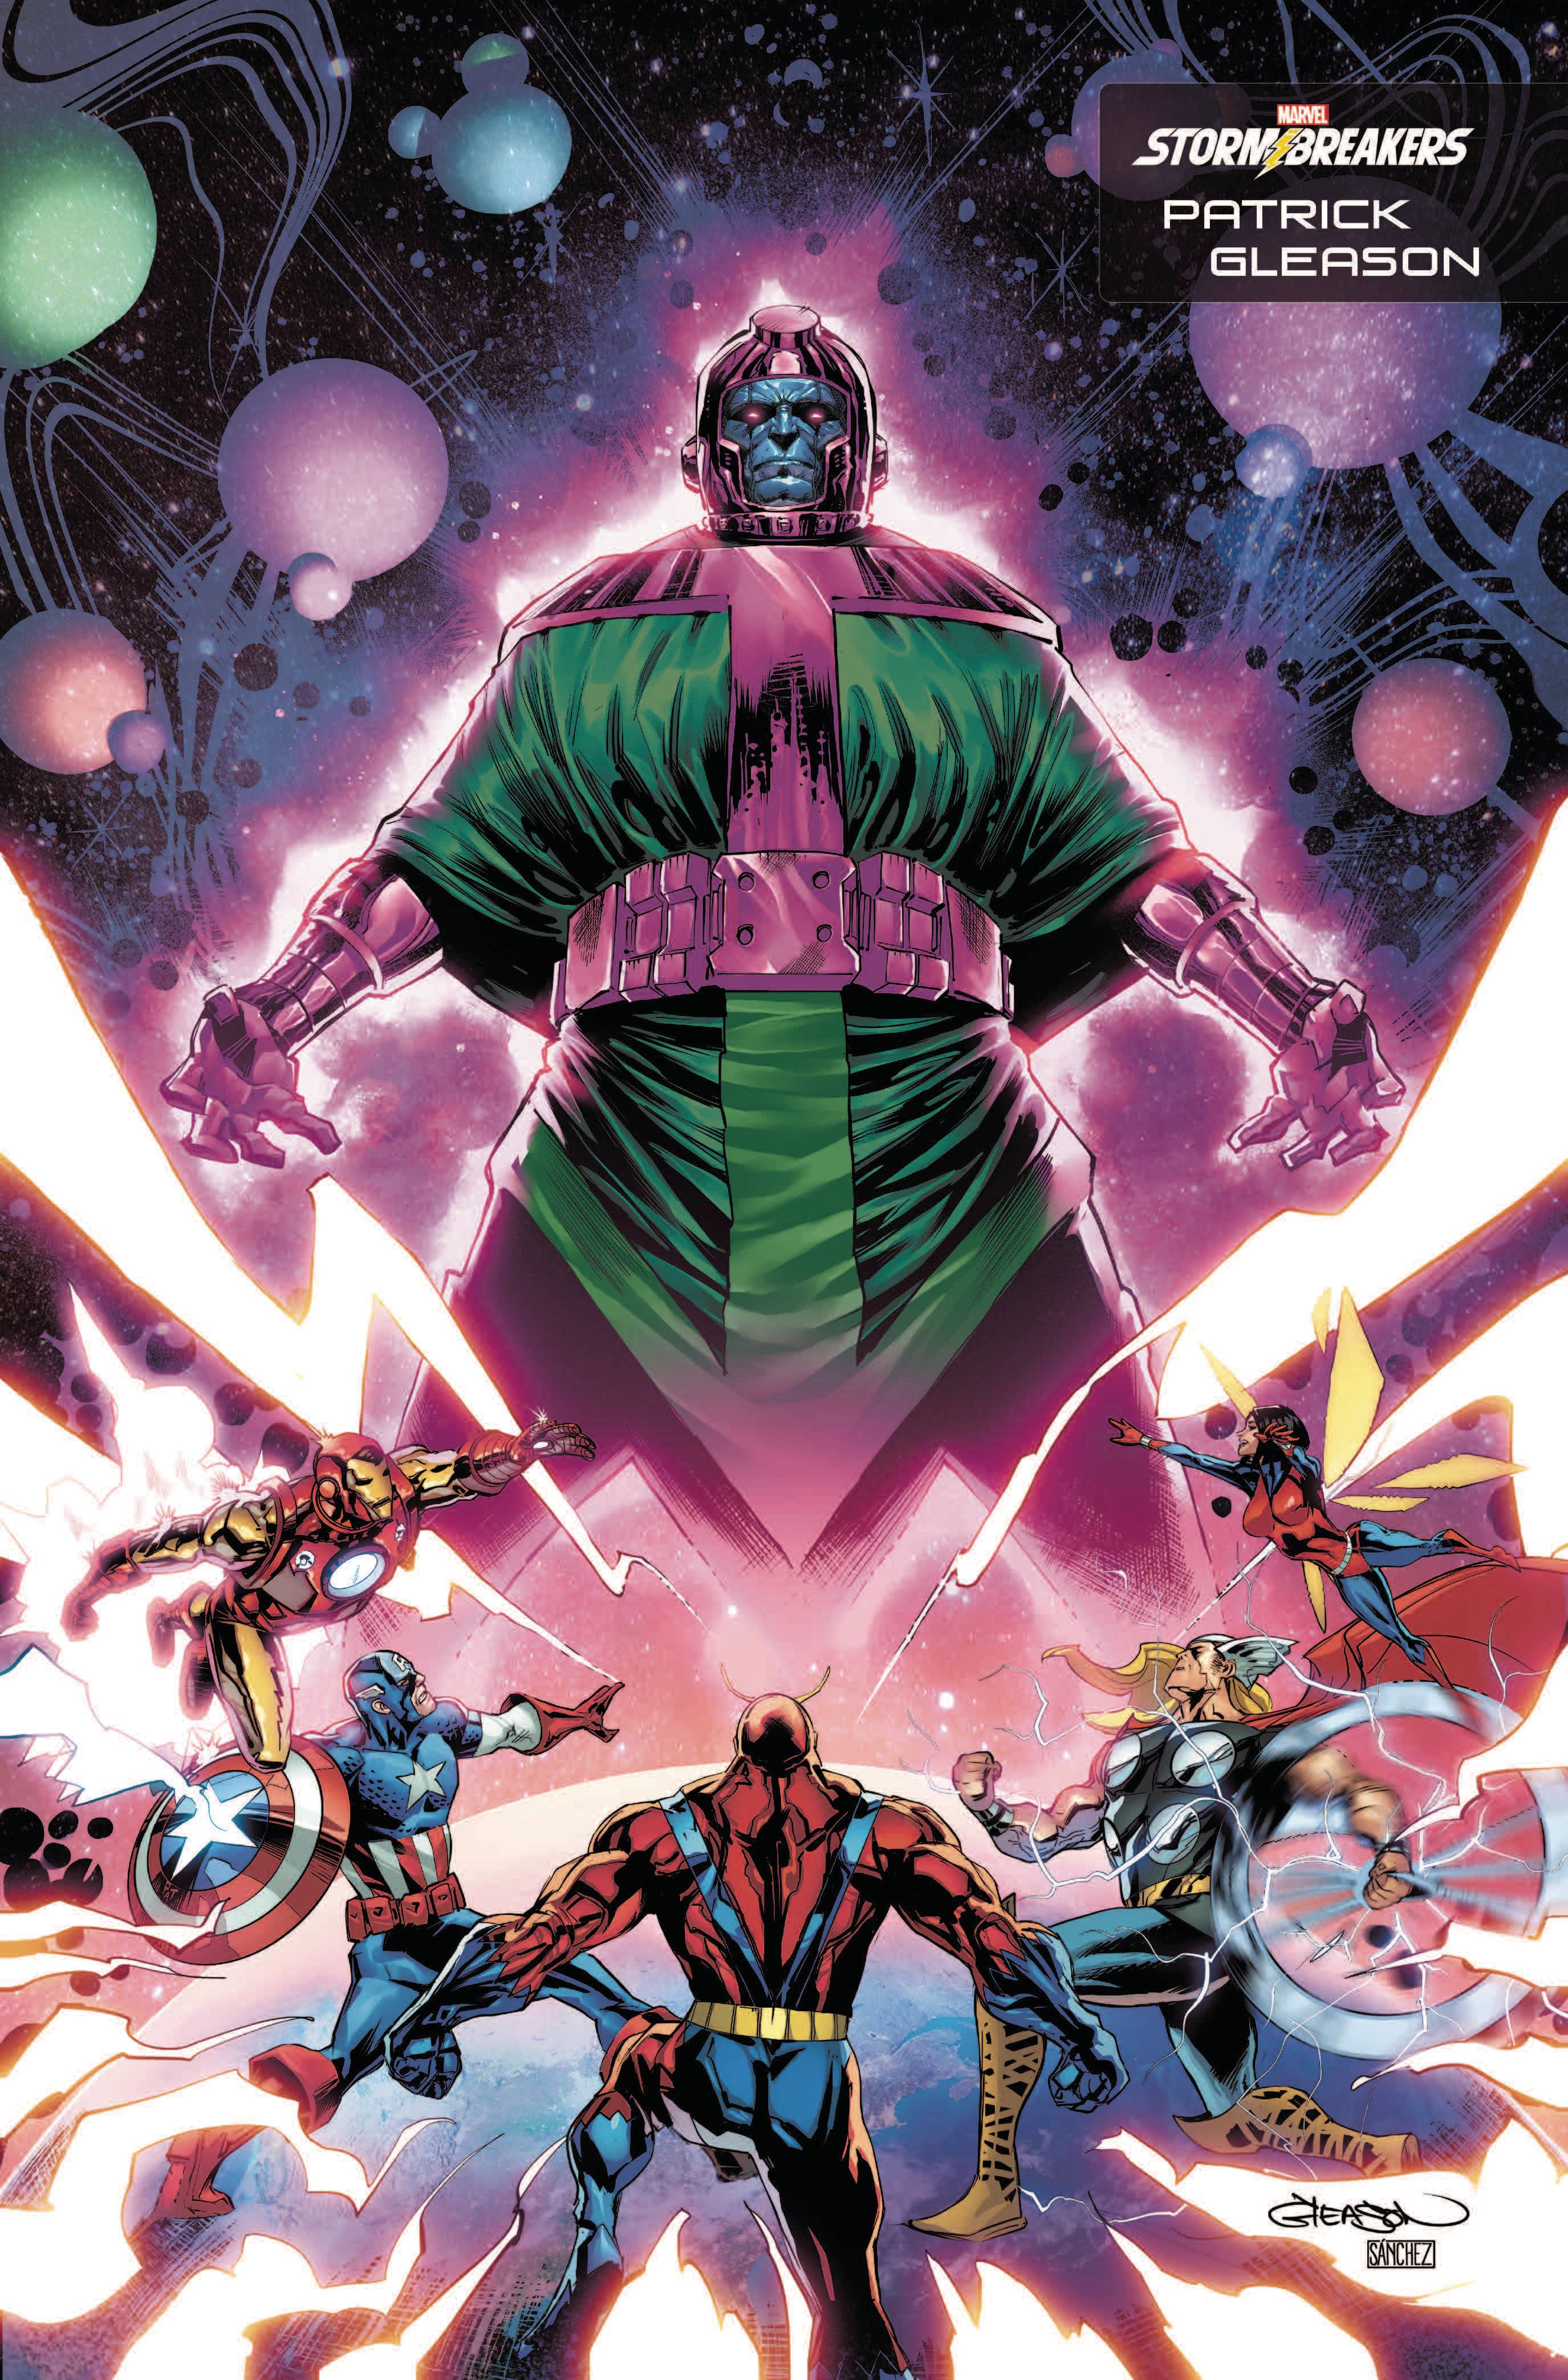 Kang The Conqueror #1 Gleason Stormbreakers Variant (Of 5)